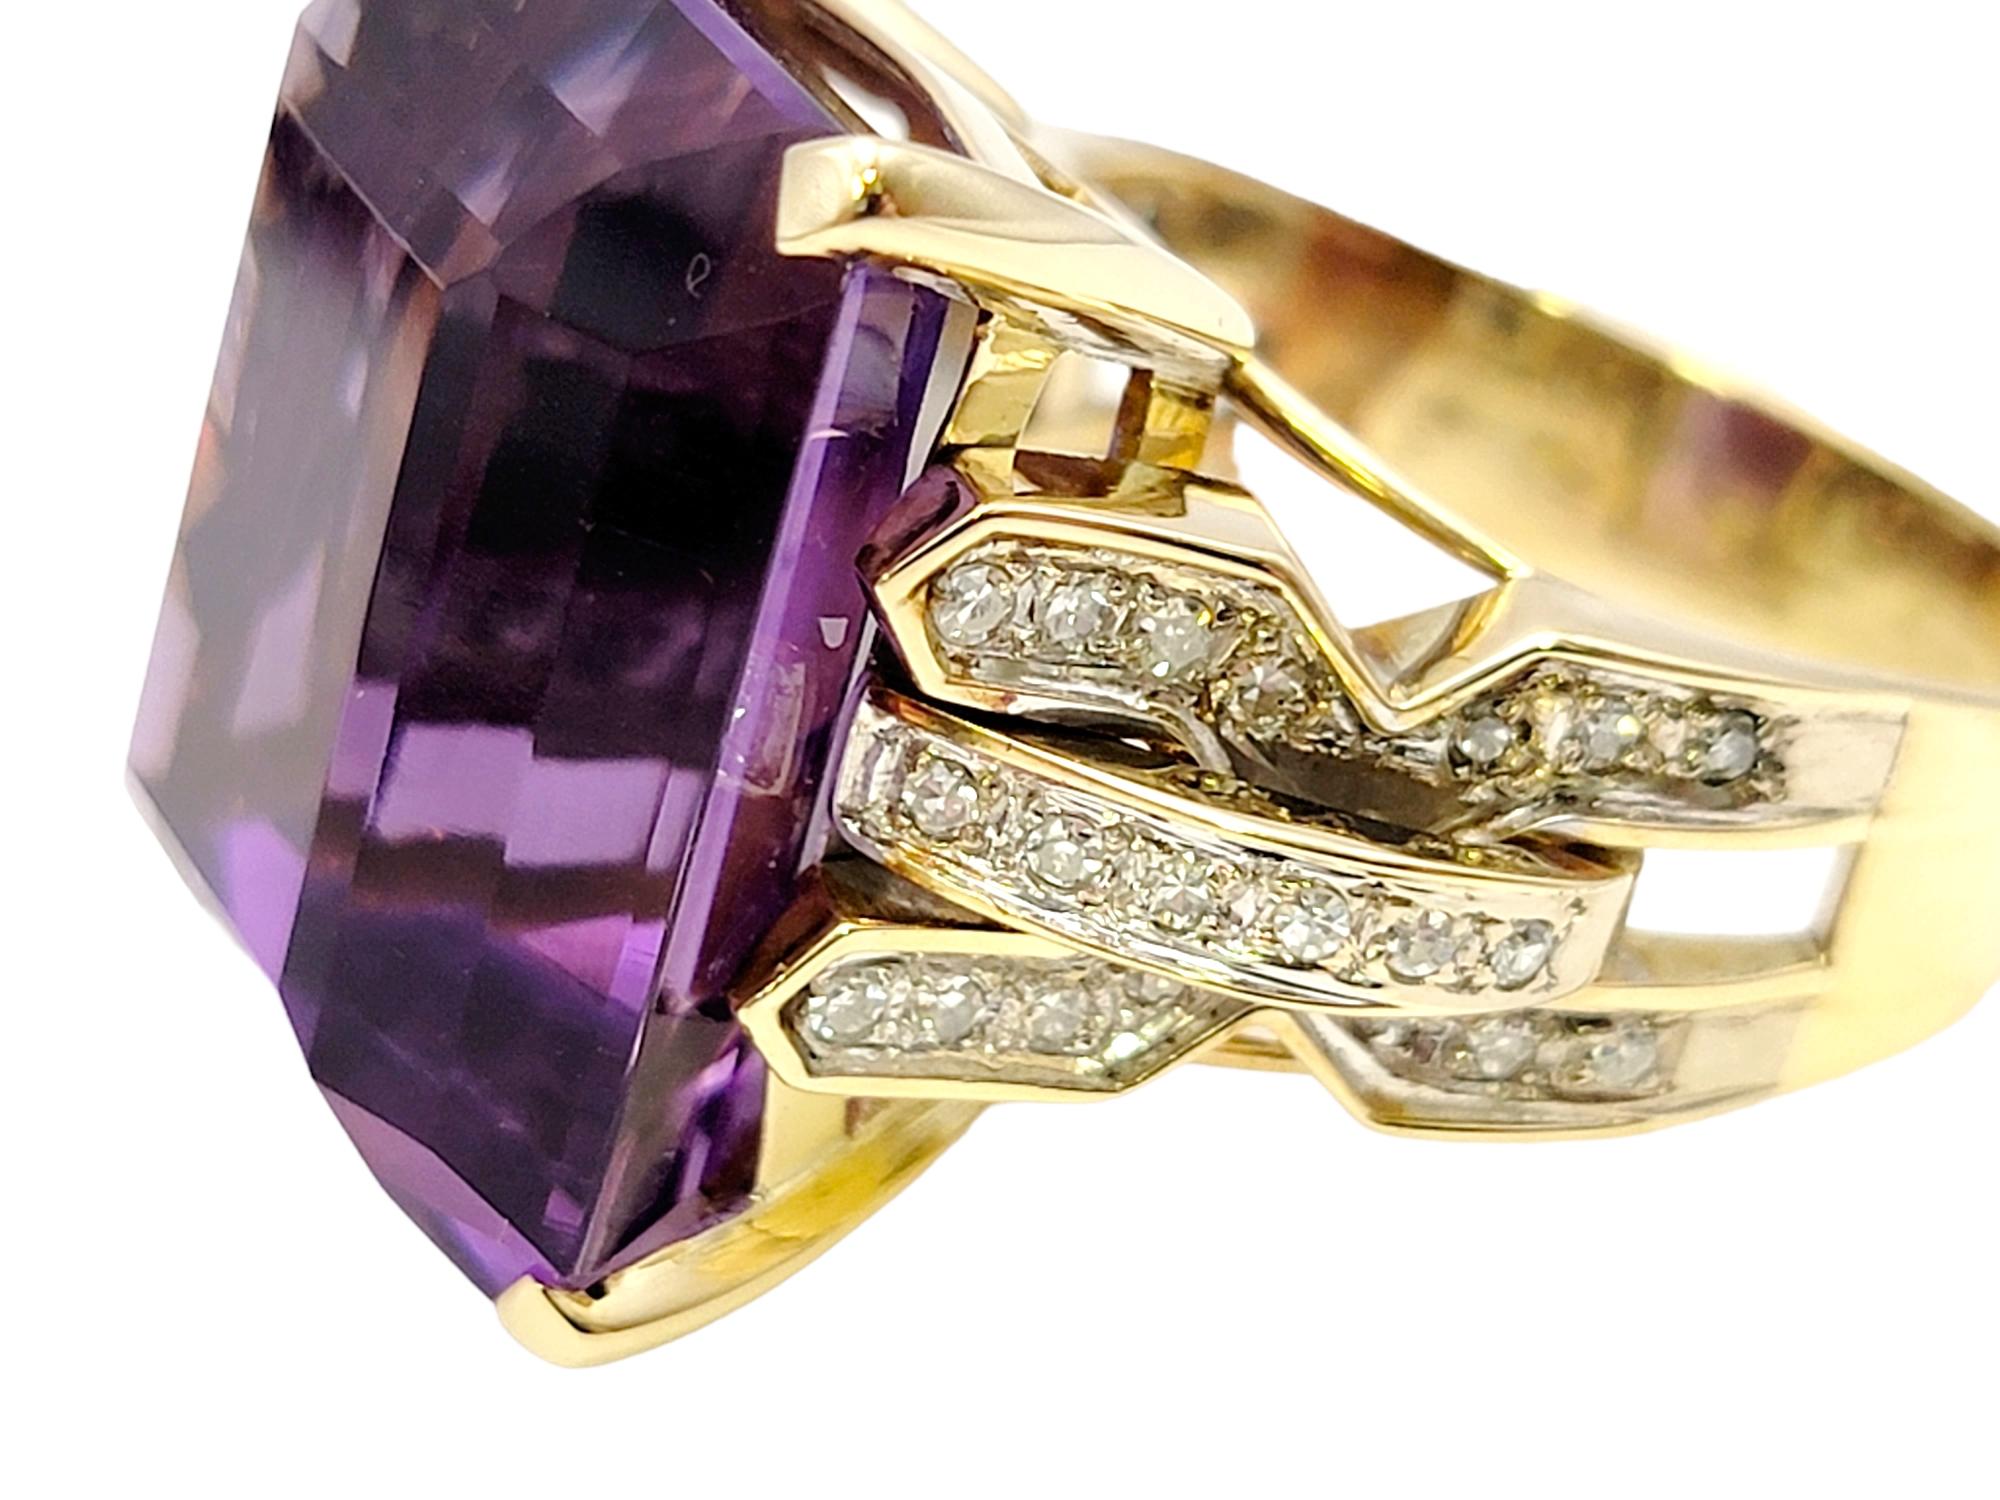 Women's Huge 34.85 Carat Emerald Cut Amethyst Cocktail Ring with Side Diamond Detailing For Sale